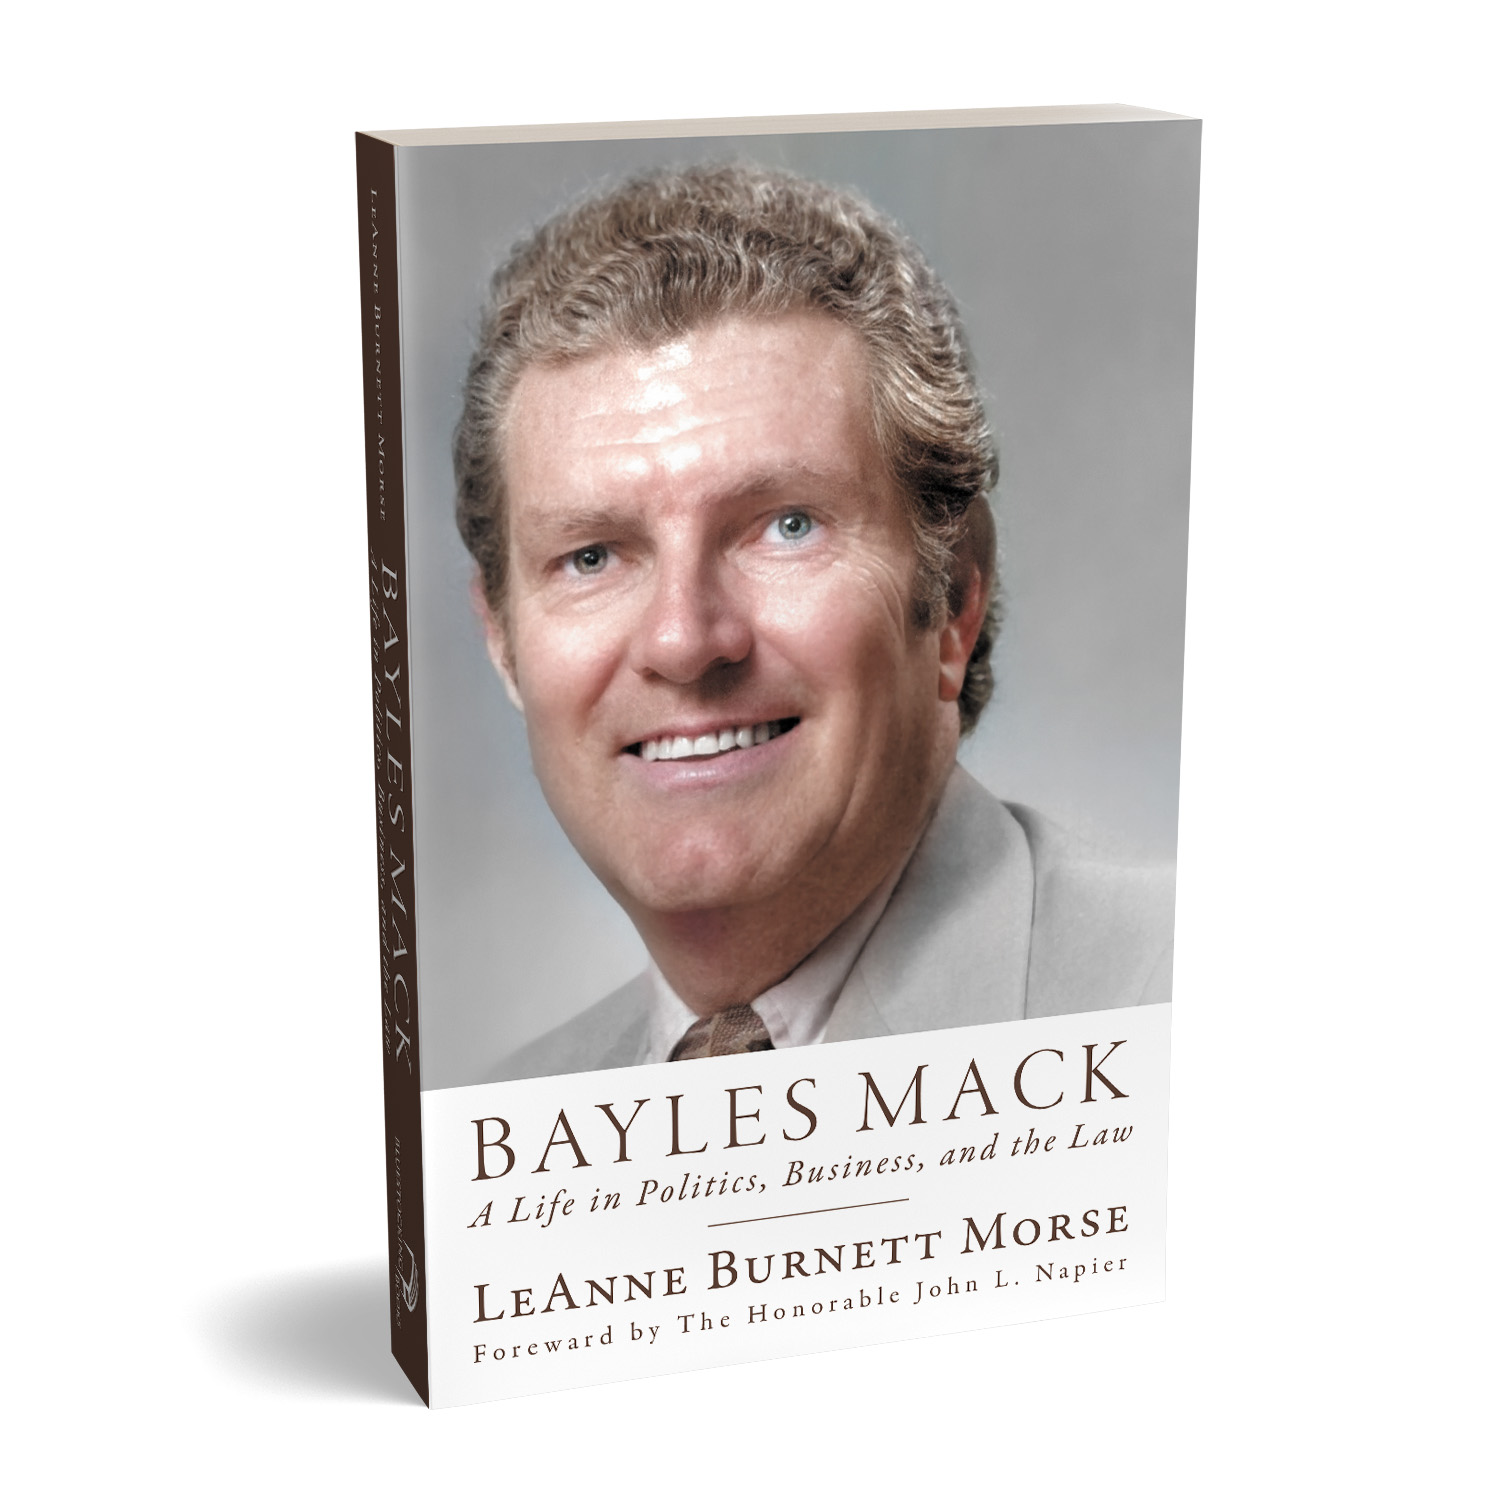 'Bayles Mack: A Life in Politics, Business and the Law' is a non-fiction biography of this prominent American lawmaker and lawyer. The author is LeAnne Burnett Morse. The cover design and interior formatting are by Mark Thomas. To learn more about what Mark could do for your book, please visit coverness.com.